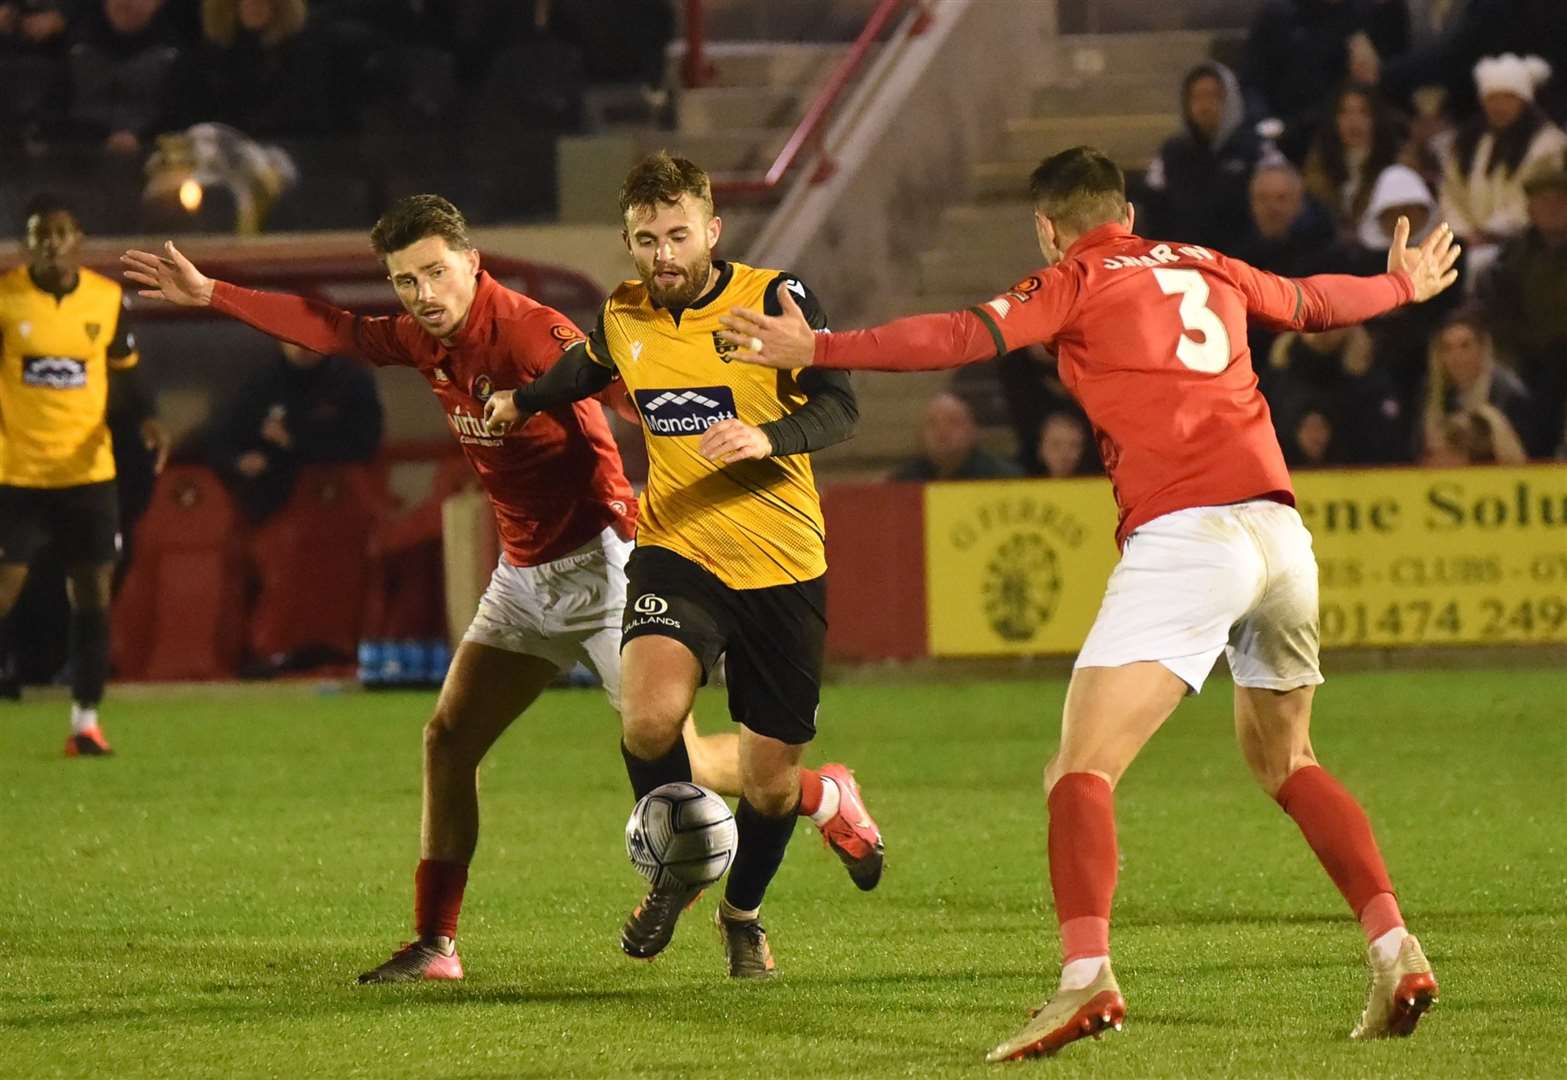 Maidstone midfielder Regan Booty is sandwiched by Jack Paxman and Joe Martin Picture: Steve Terrell